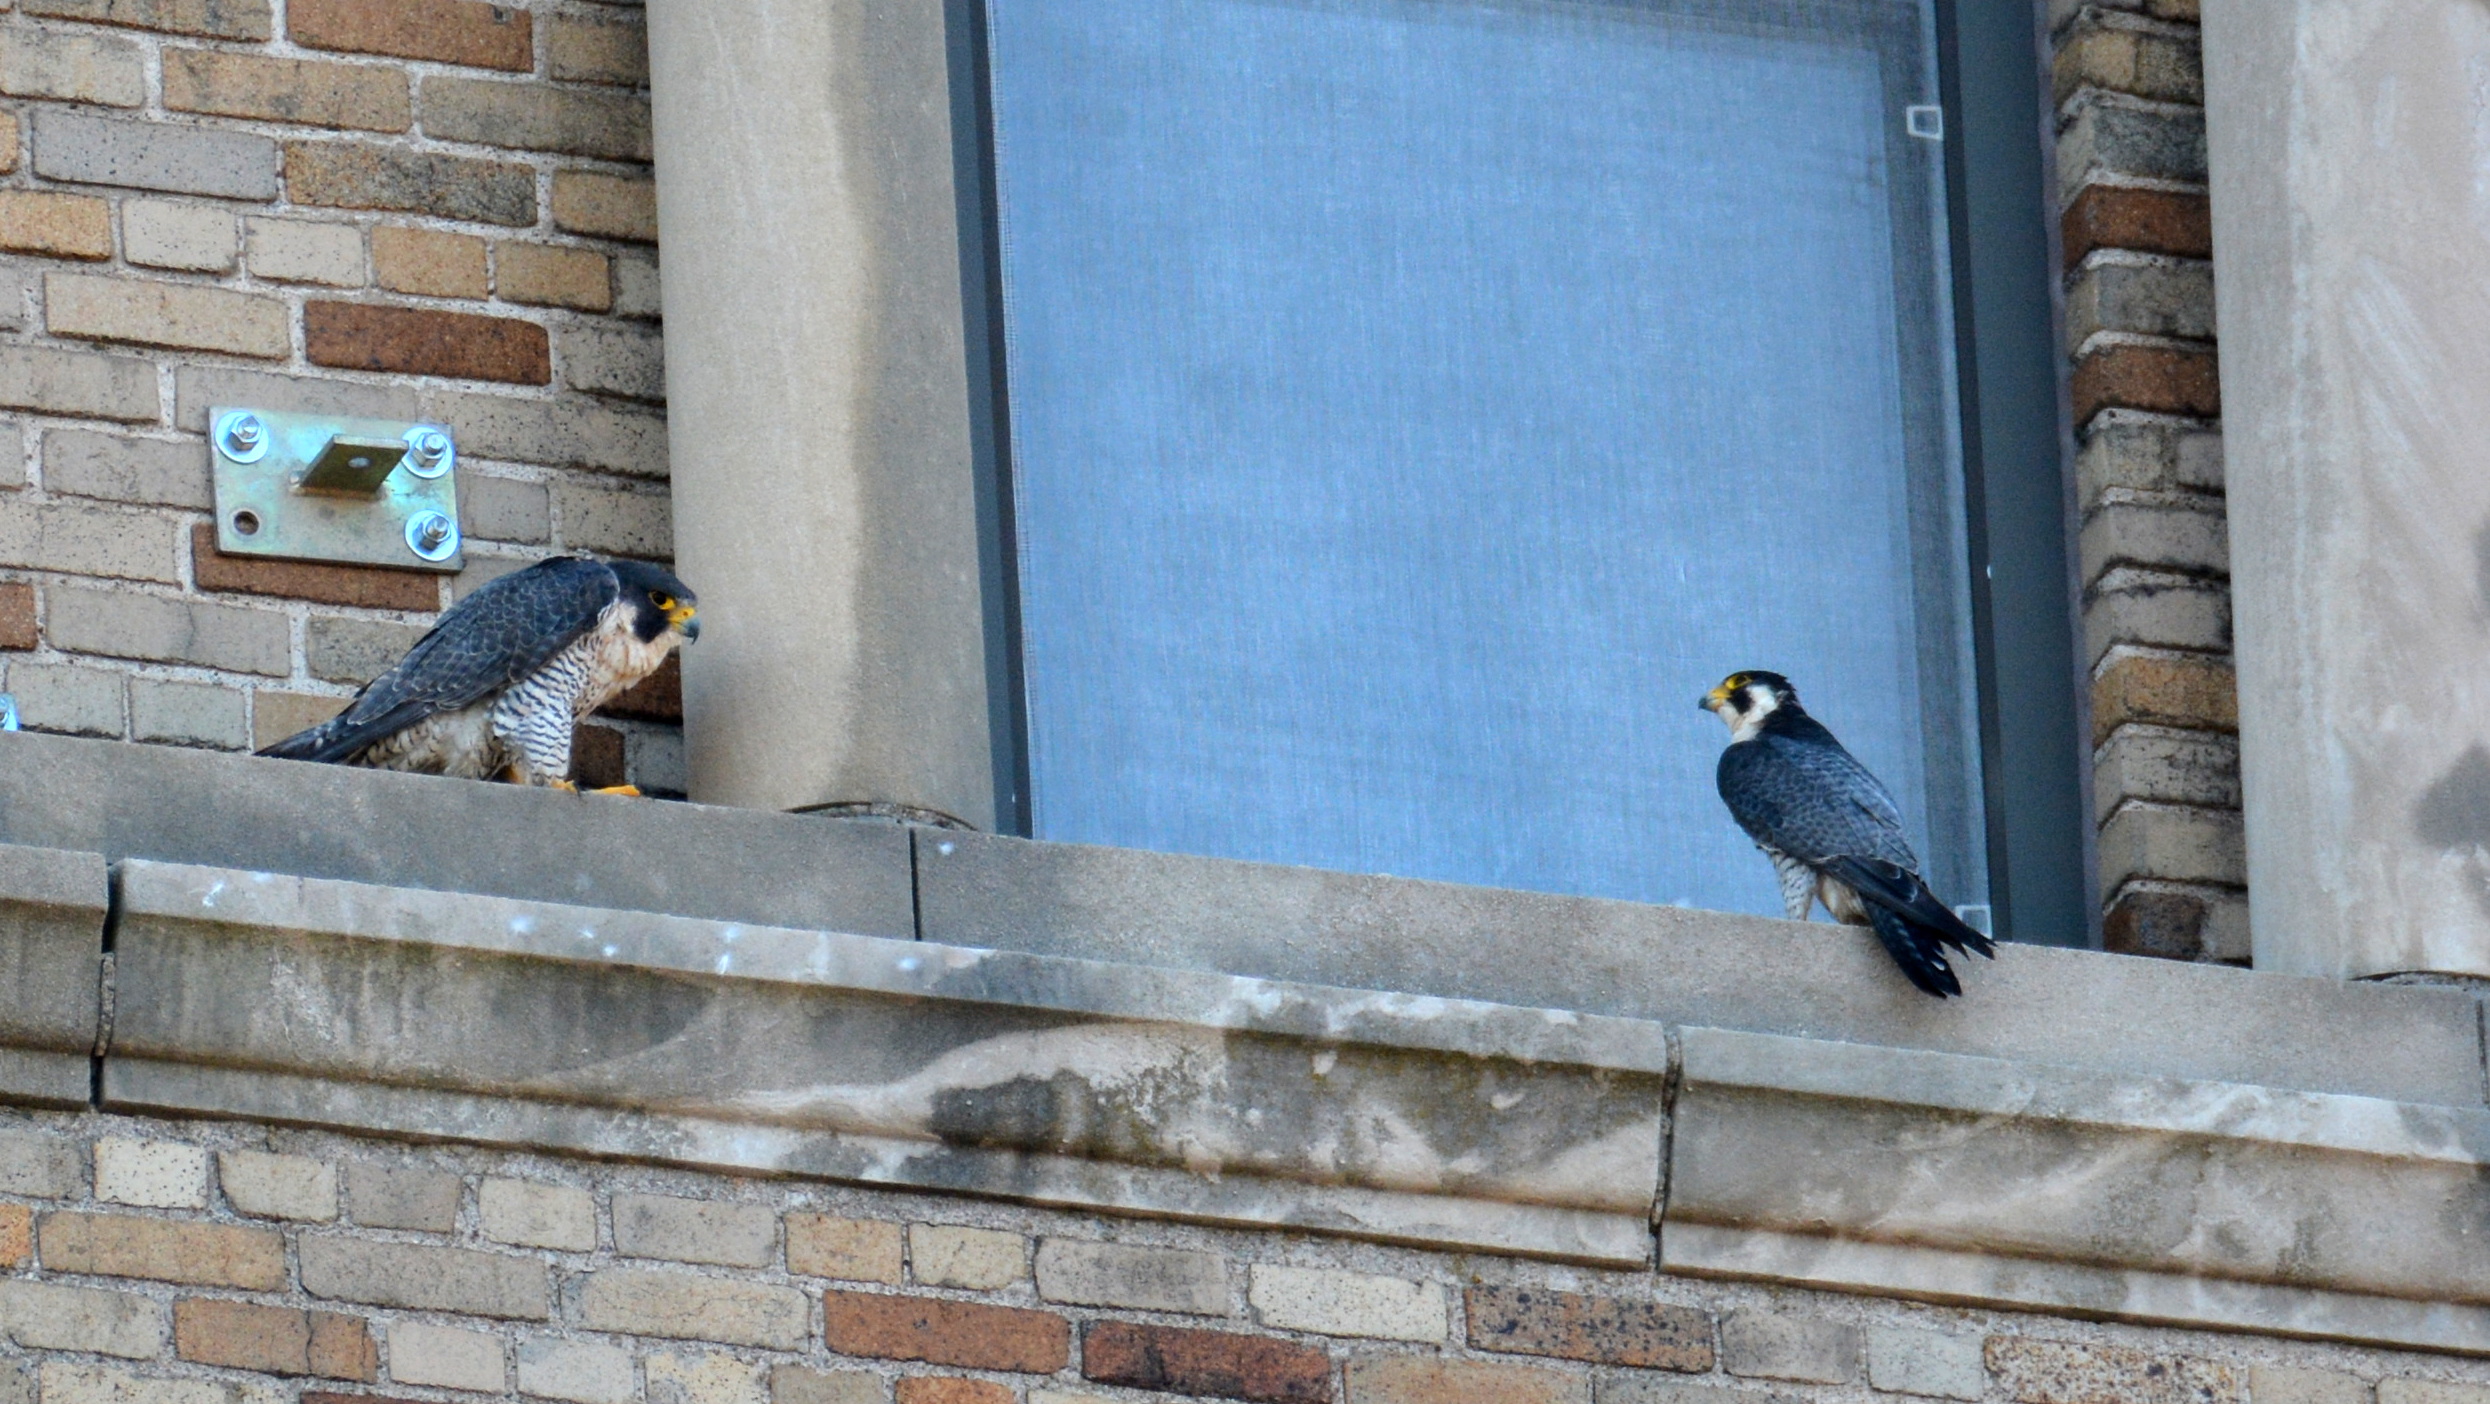 Astrid and Ares keep a low profile on the side of the ADK Bank Building